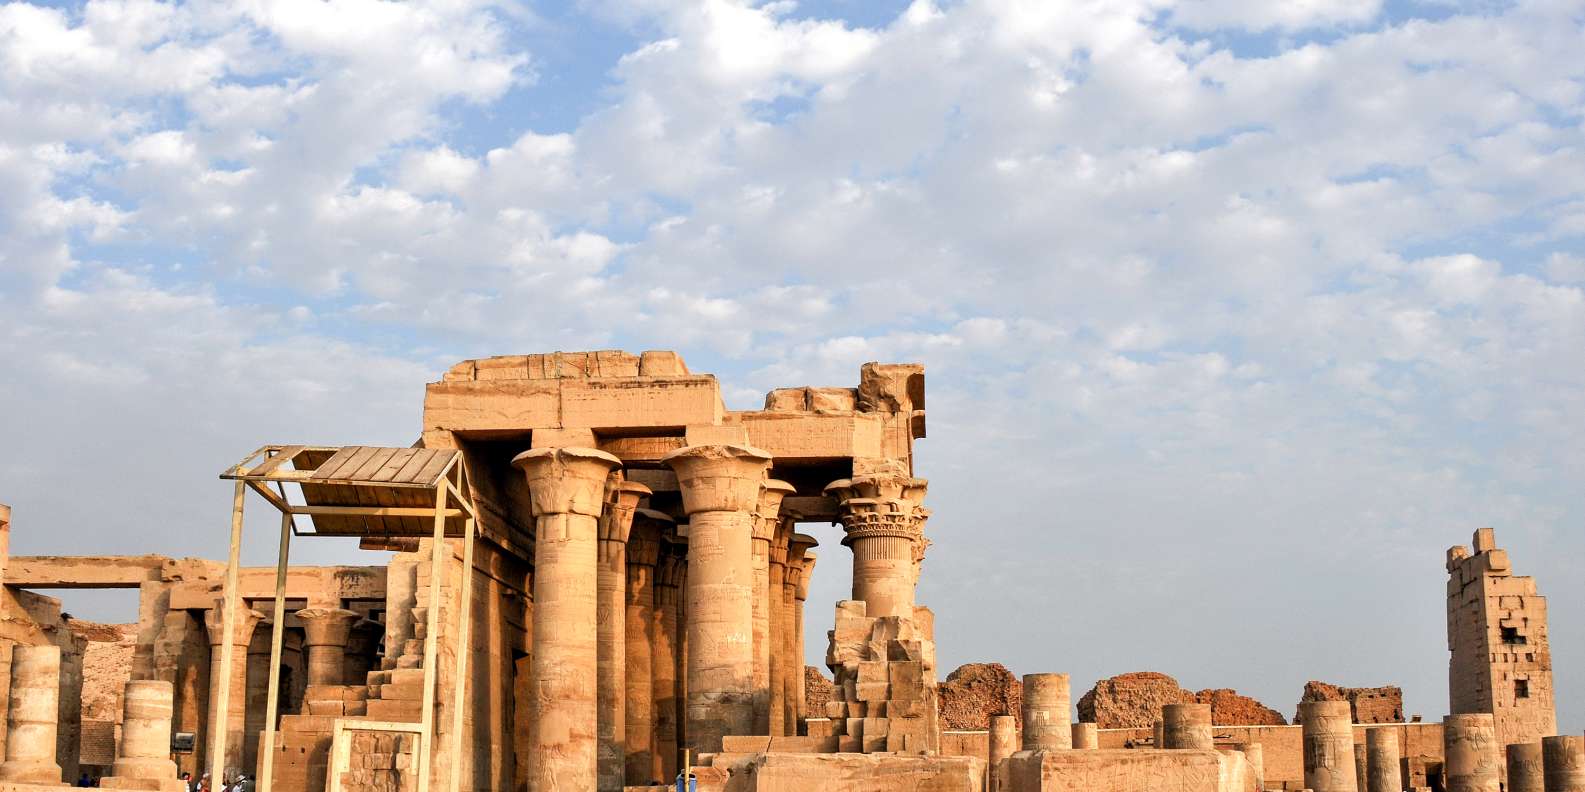 Day 2: Kom Ombo and Edfu Temples